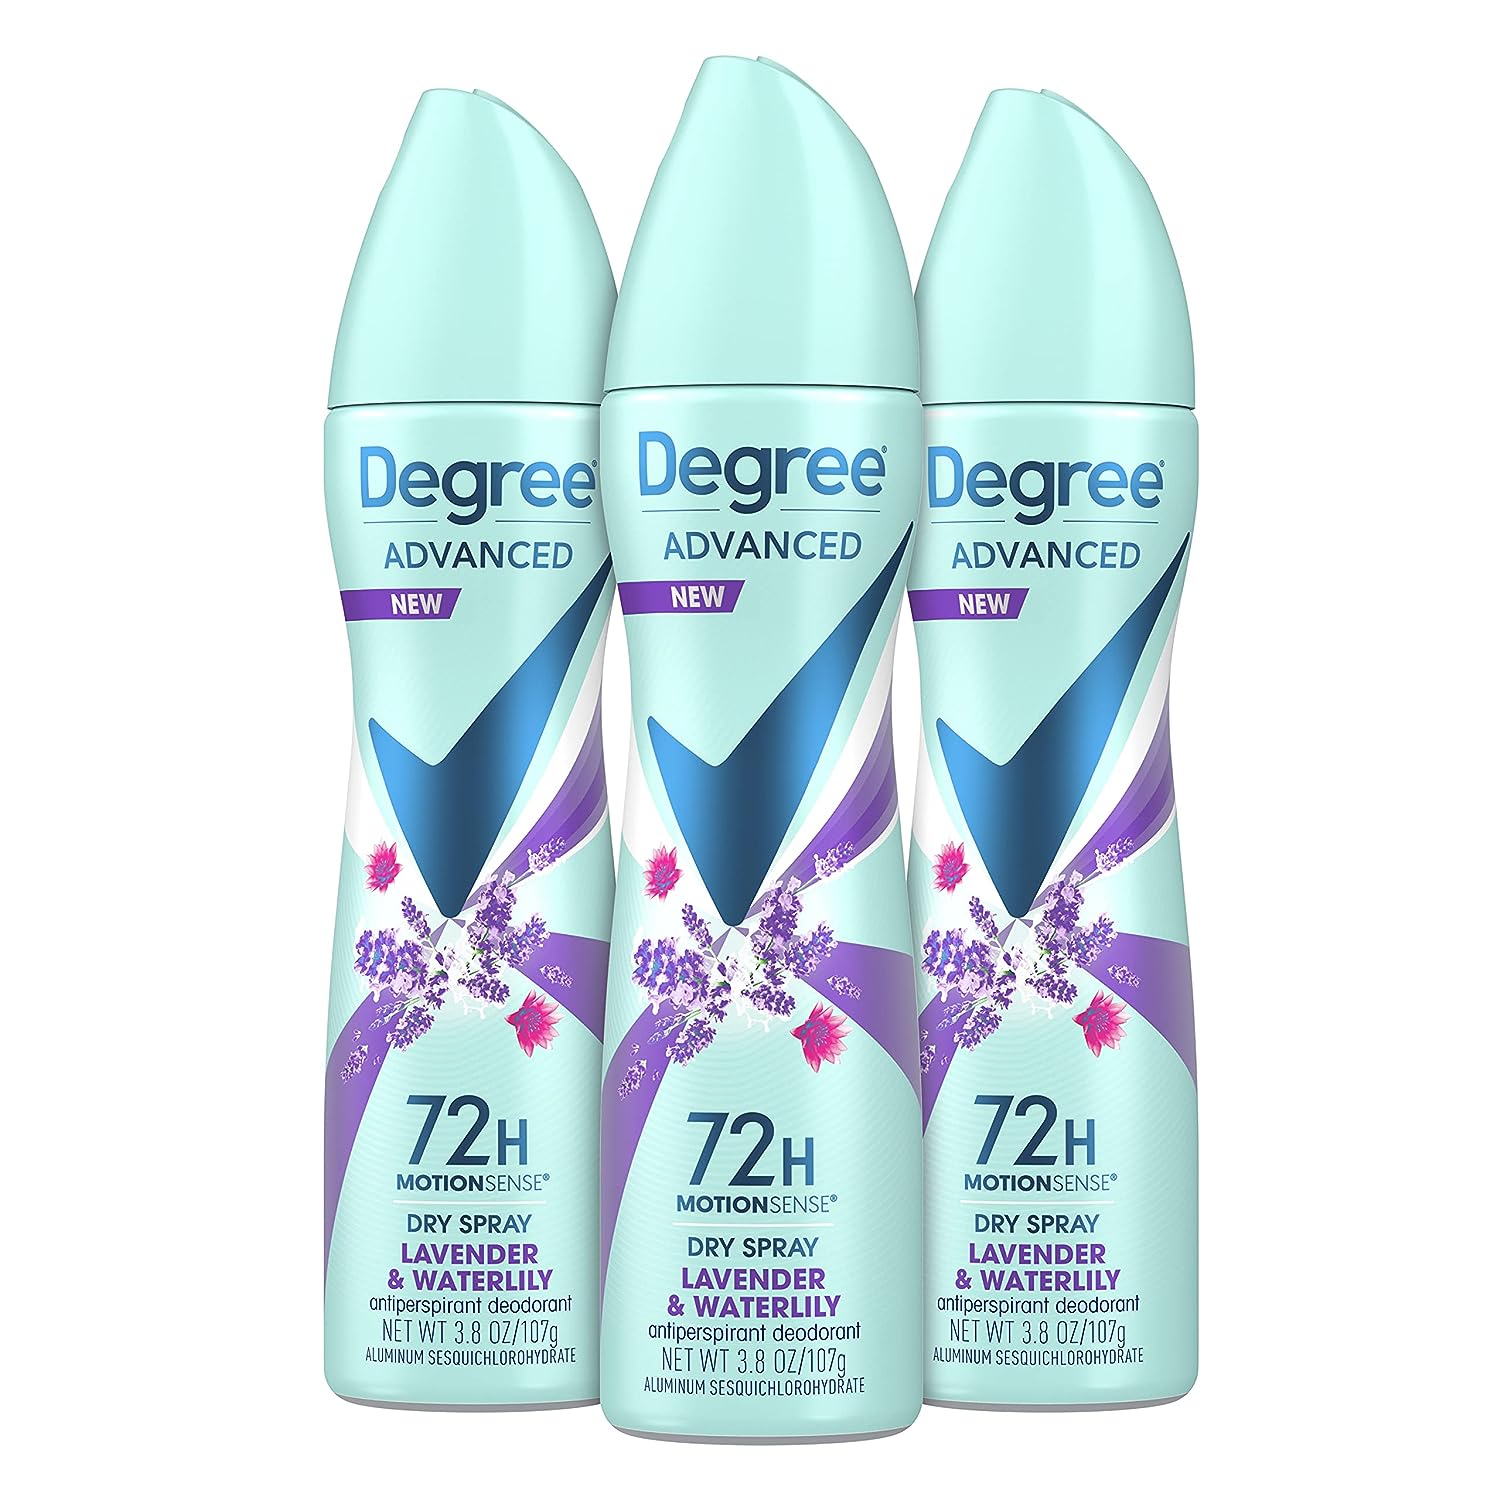 Degree Antiperspirant Deodorant Dry Spray 72-Hour Sweat and Odor Protection Lavender and Waterlily Deodorant Spray For Women With MotionSense Technology 3.8 oz 3 Count